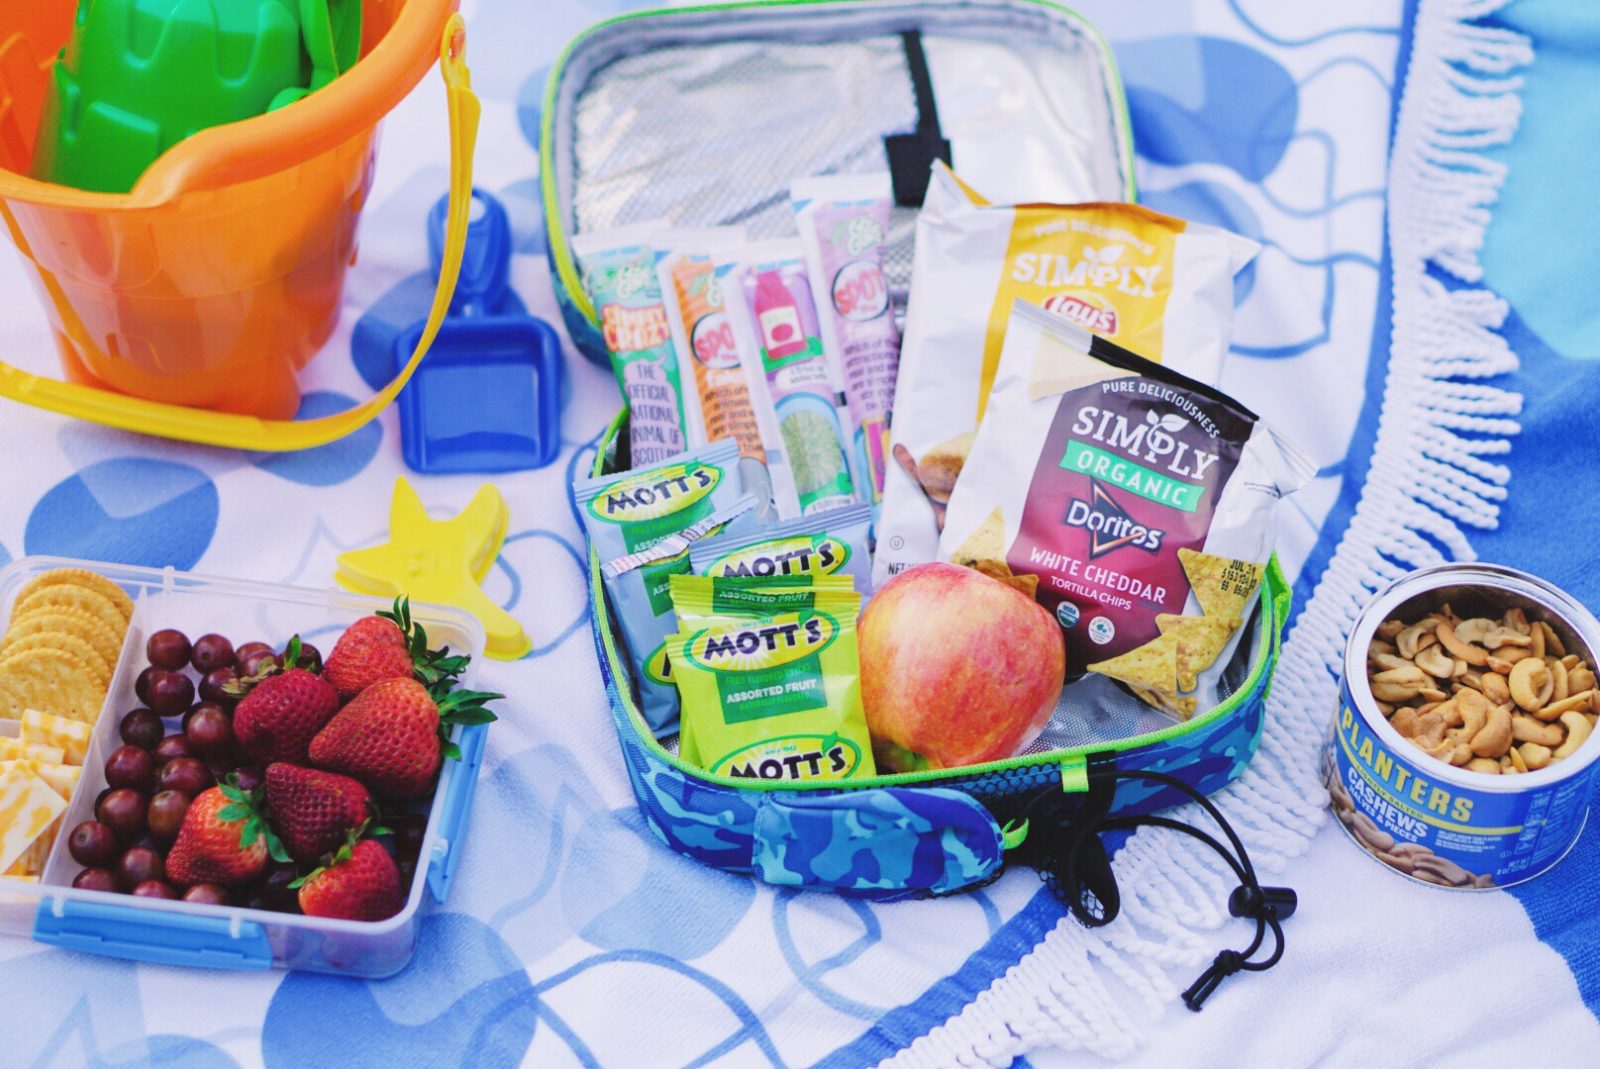 Snack Ideas for Spending a Day at the Beach - Beach Snacks and Picnic Ideas via Misty Nelson frostedevents.com Publix 